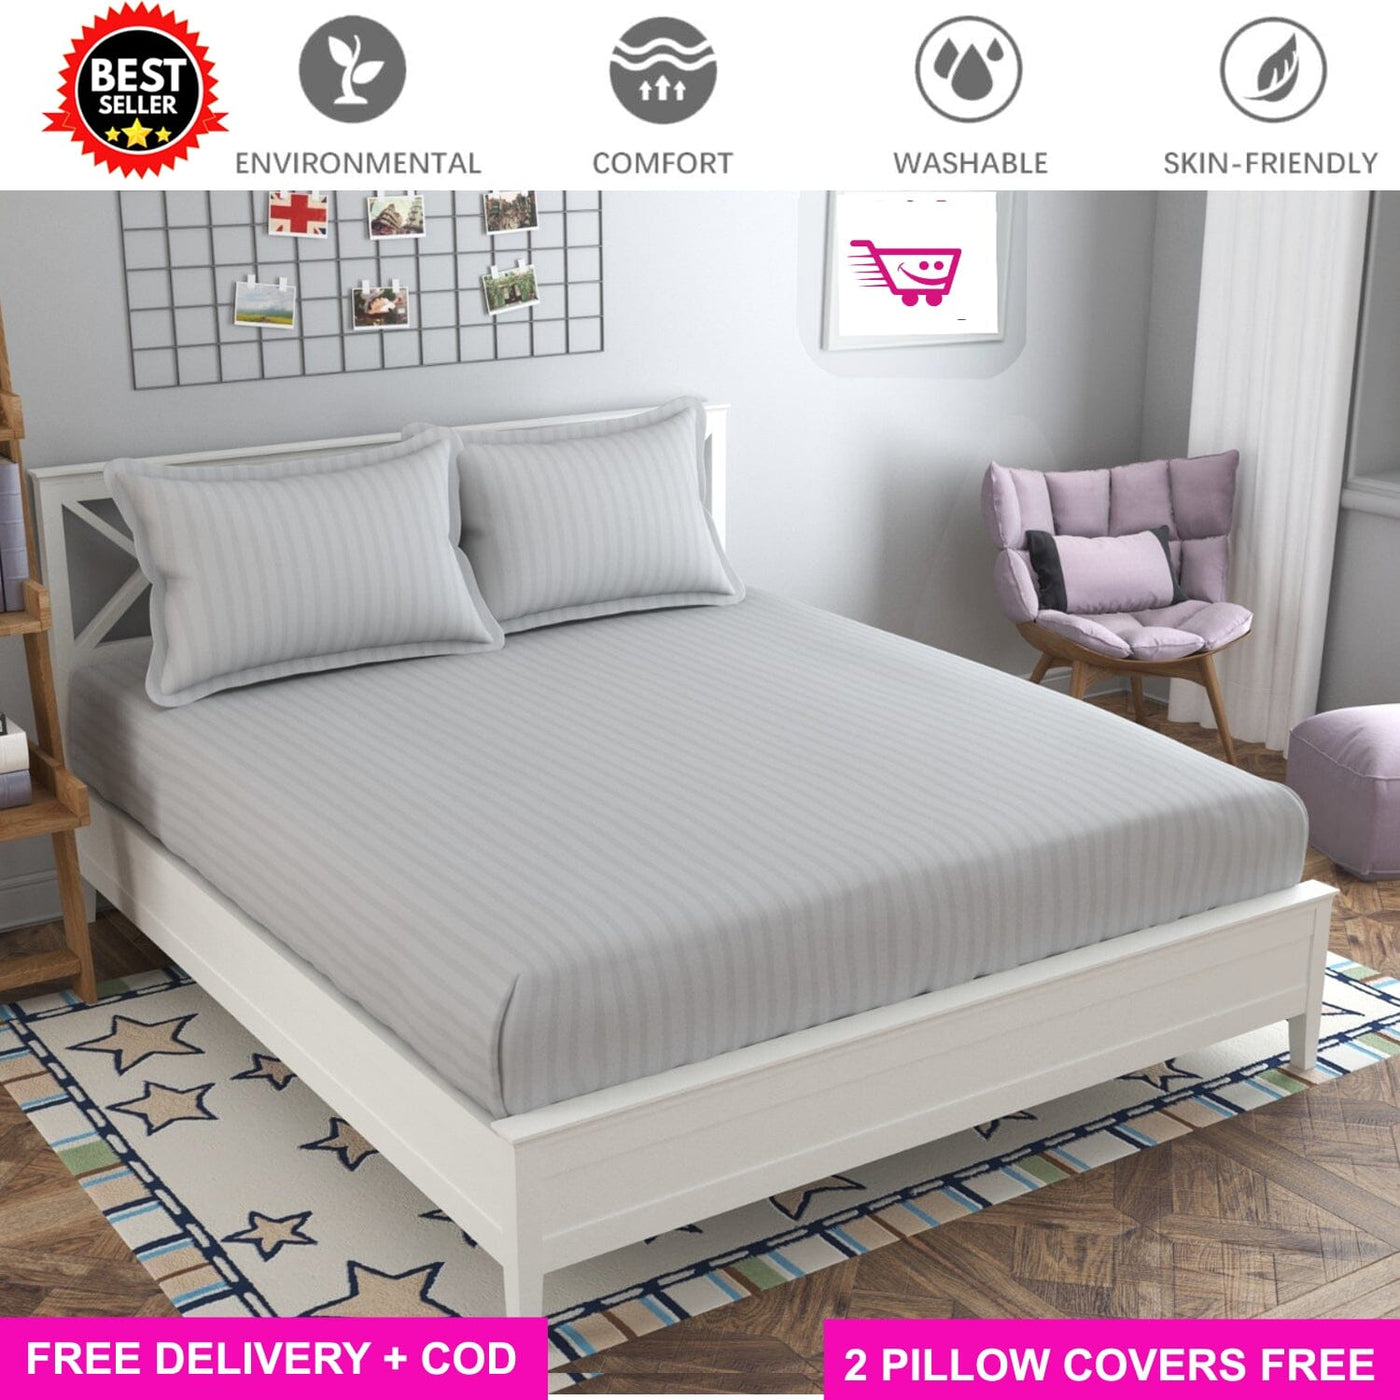 Silver Satin Full Elastic Fitted Bedsheet with 2 Pillow Covers - King Size Bed Sheets Great Happy IN 